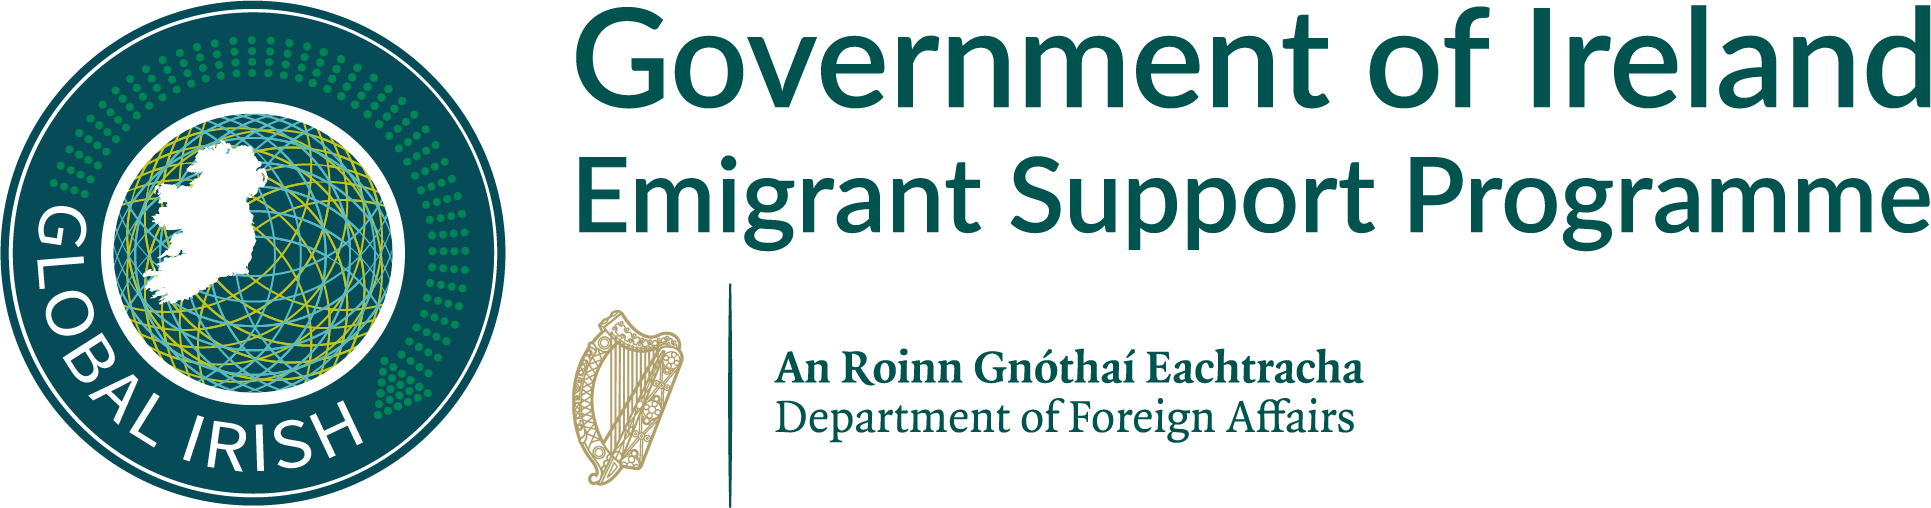 Government of Ireland Emigrant Support Programme Icon